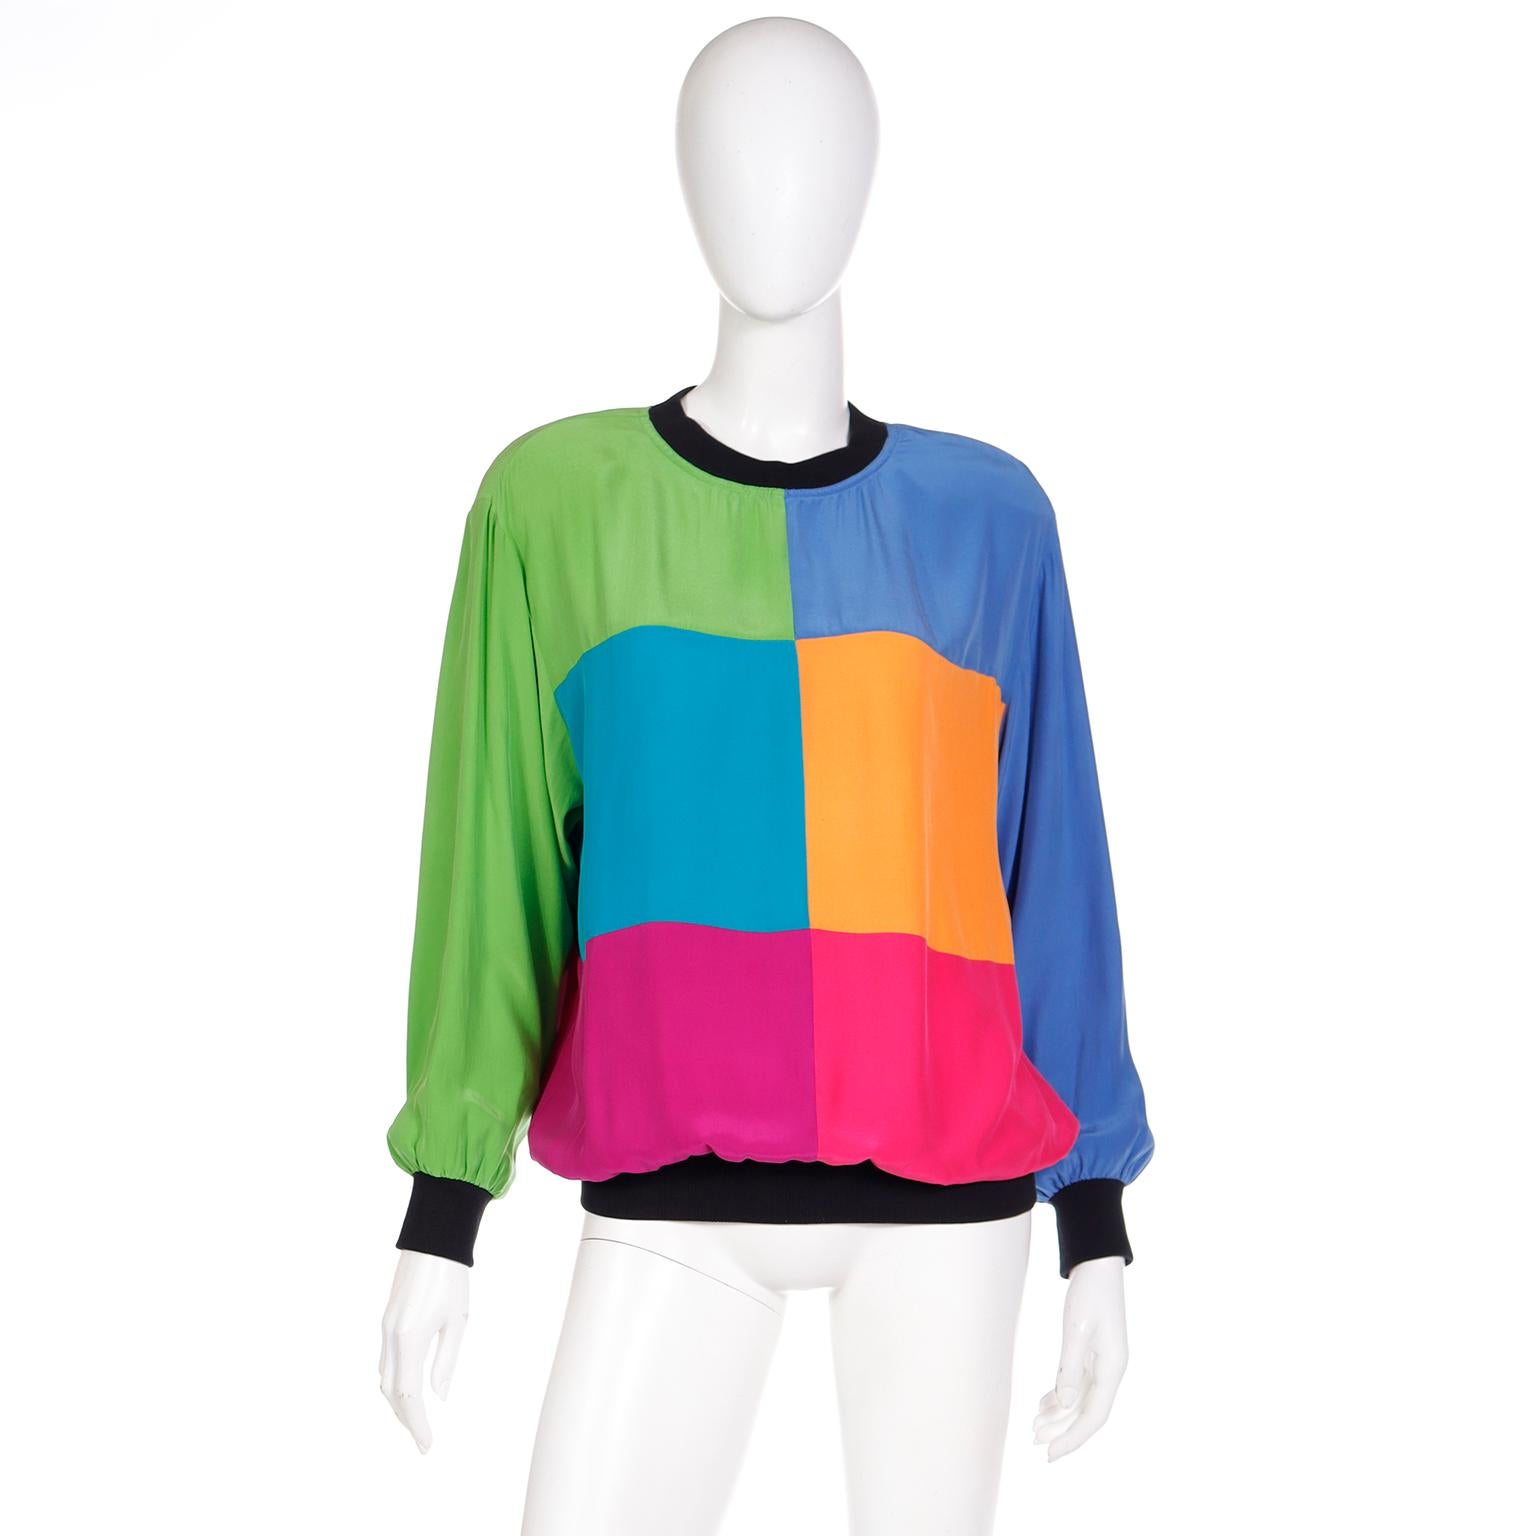 We love this easy to wear vintage Emanuel Ungaro long sleeve pullover top. The top has fun sweatshirt styling with a black ribbed knit collar, cuffs, and hemline. The blocks of colors are in pretty shades of green, blue, orange and pink and they